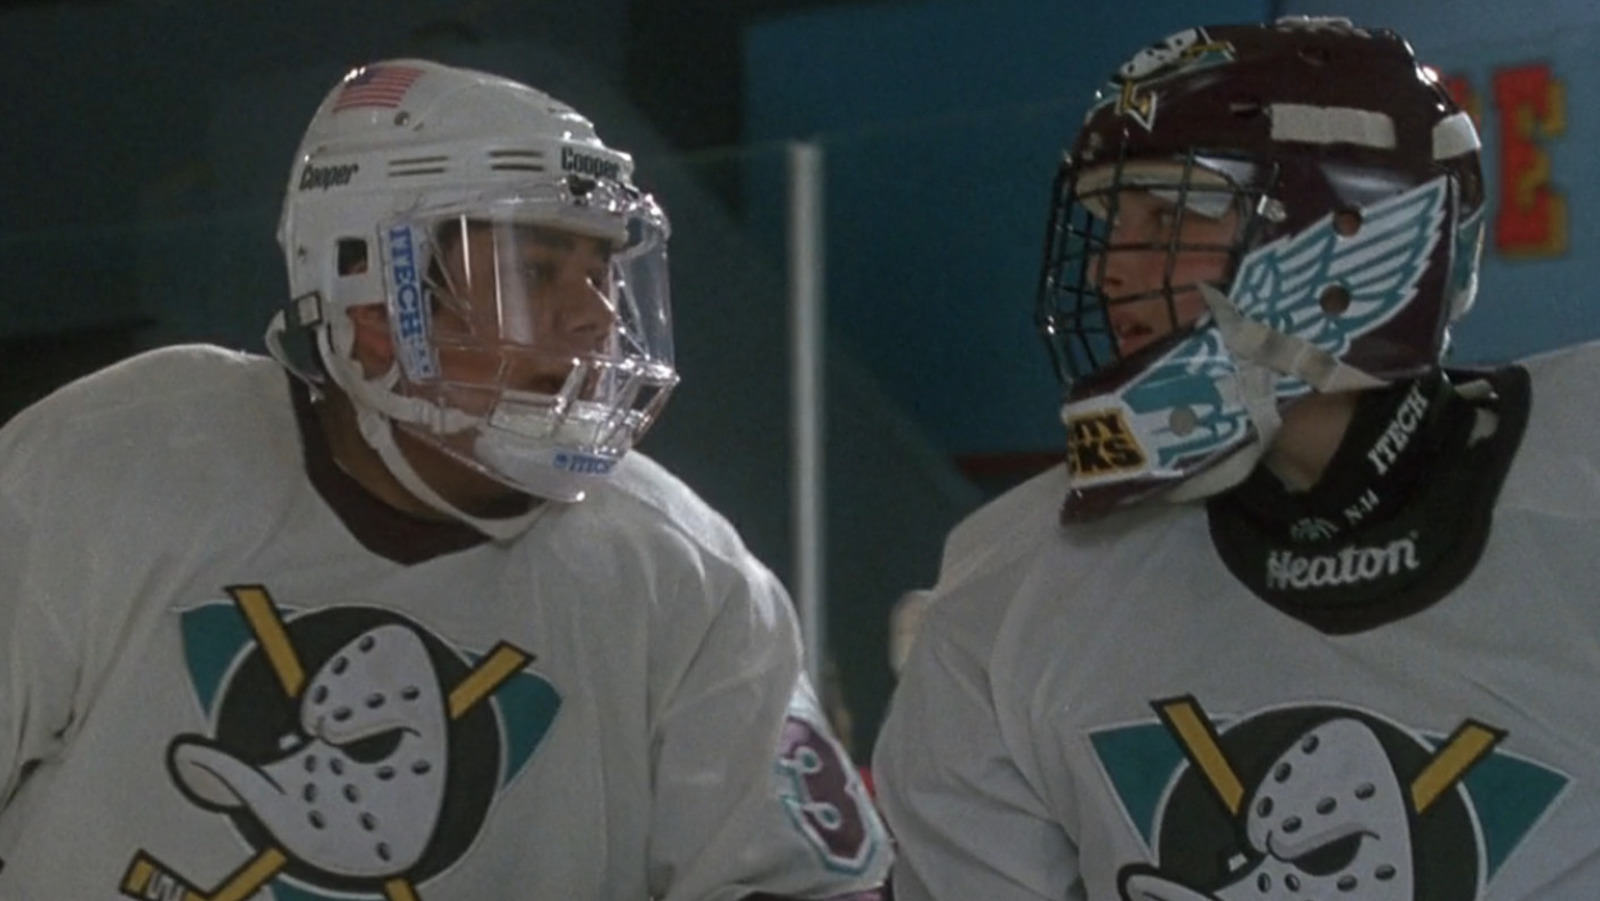 Connie Moreau/Guy Germaine's wedding: Which Mighty Ducks attend?